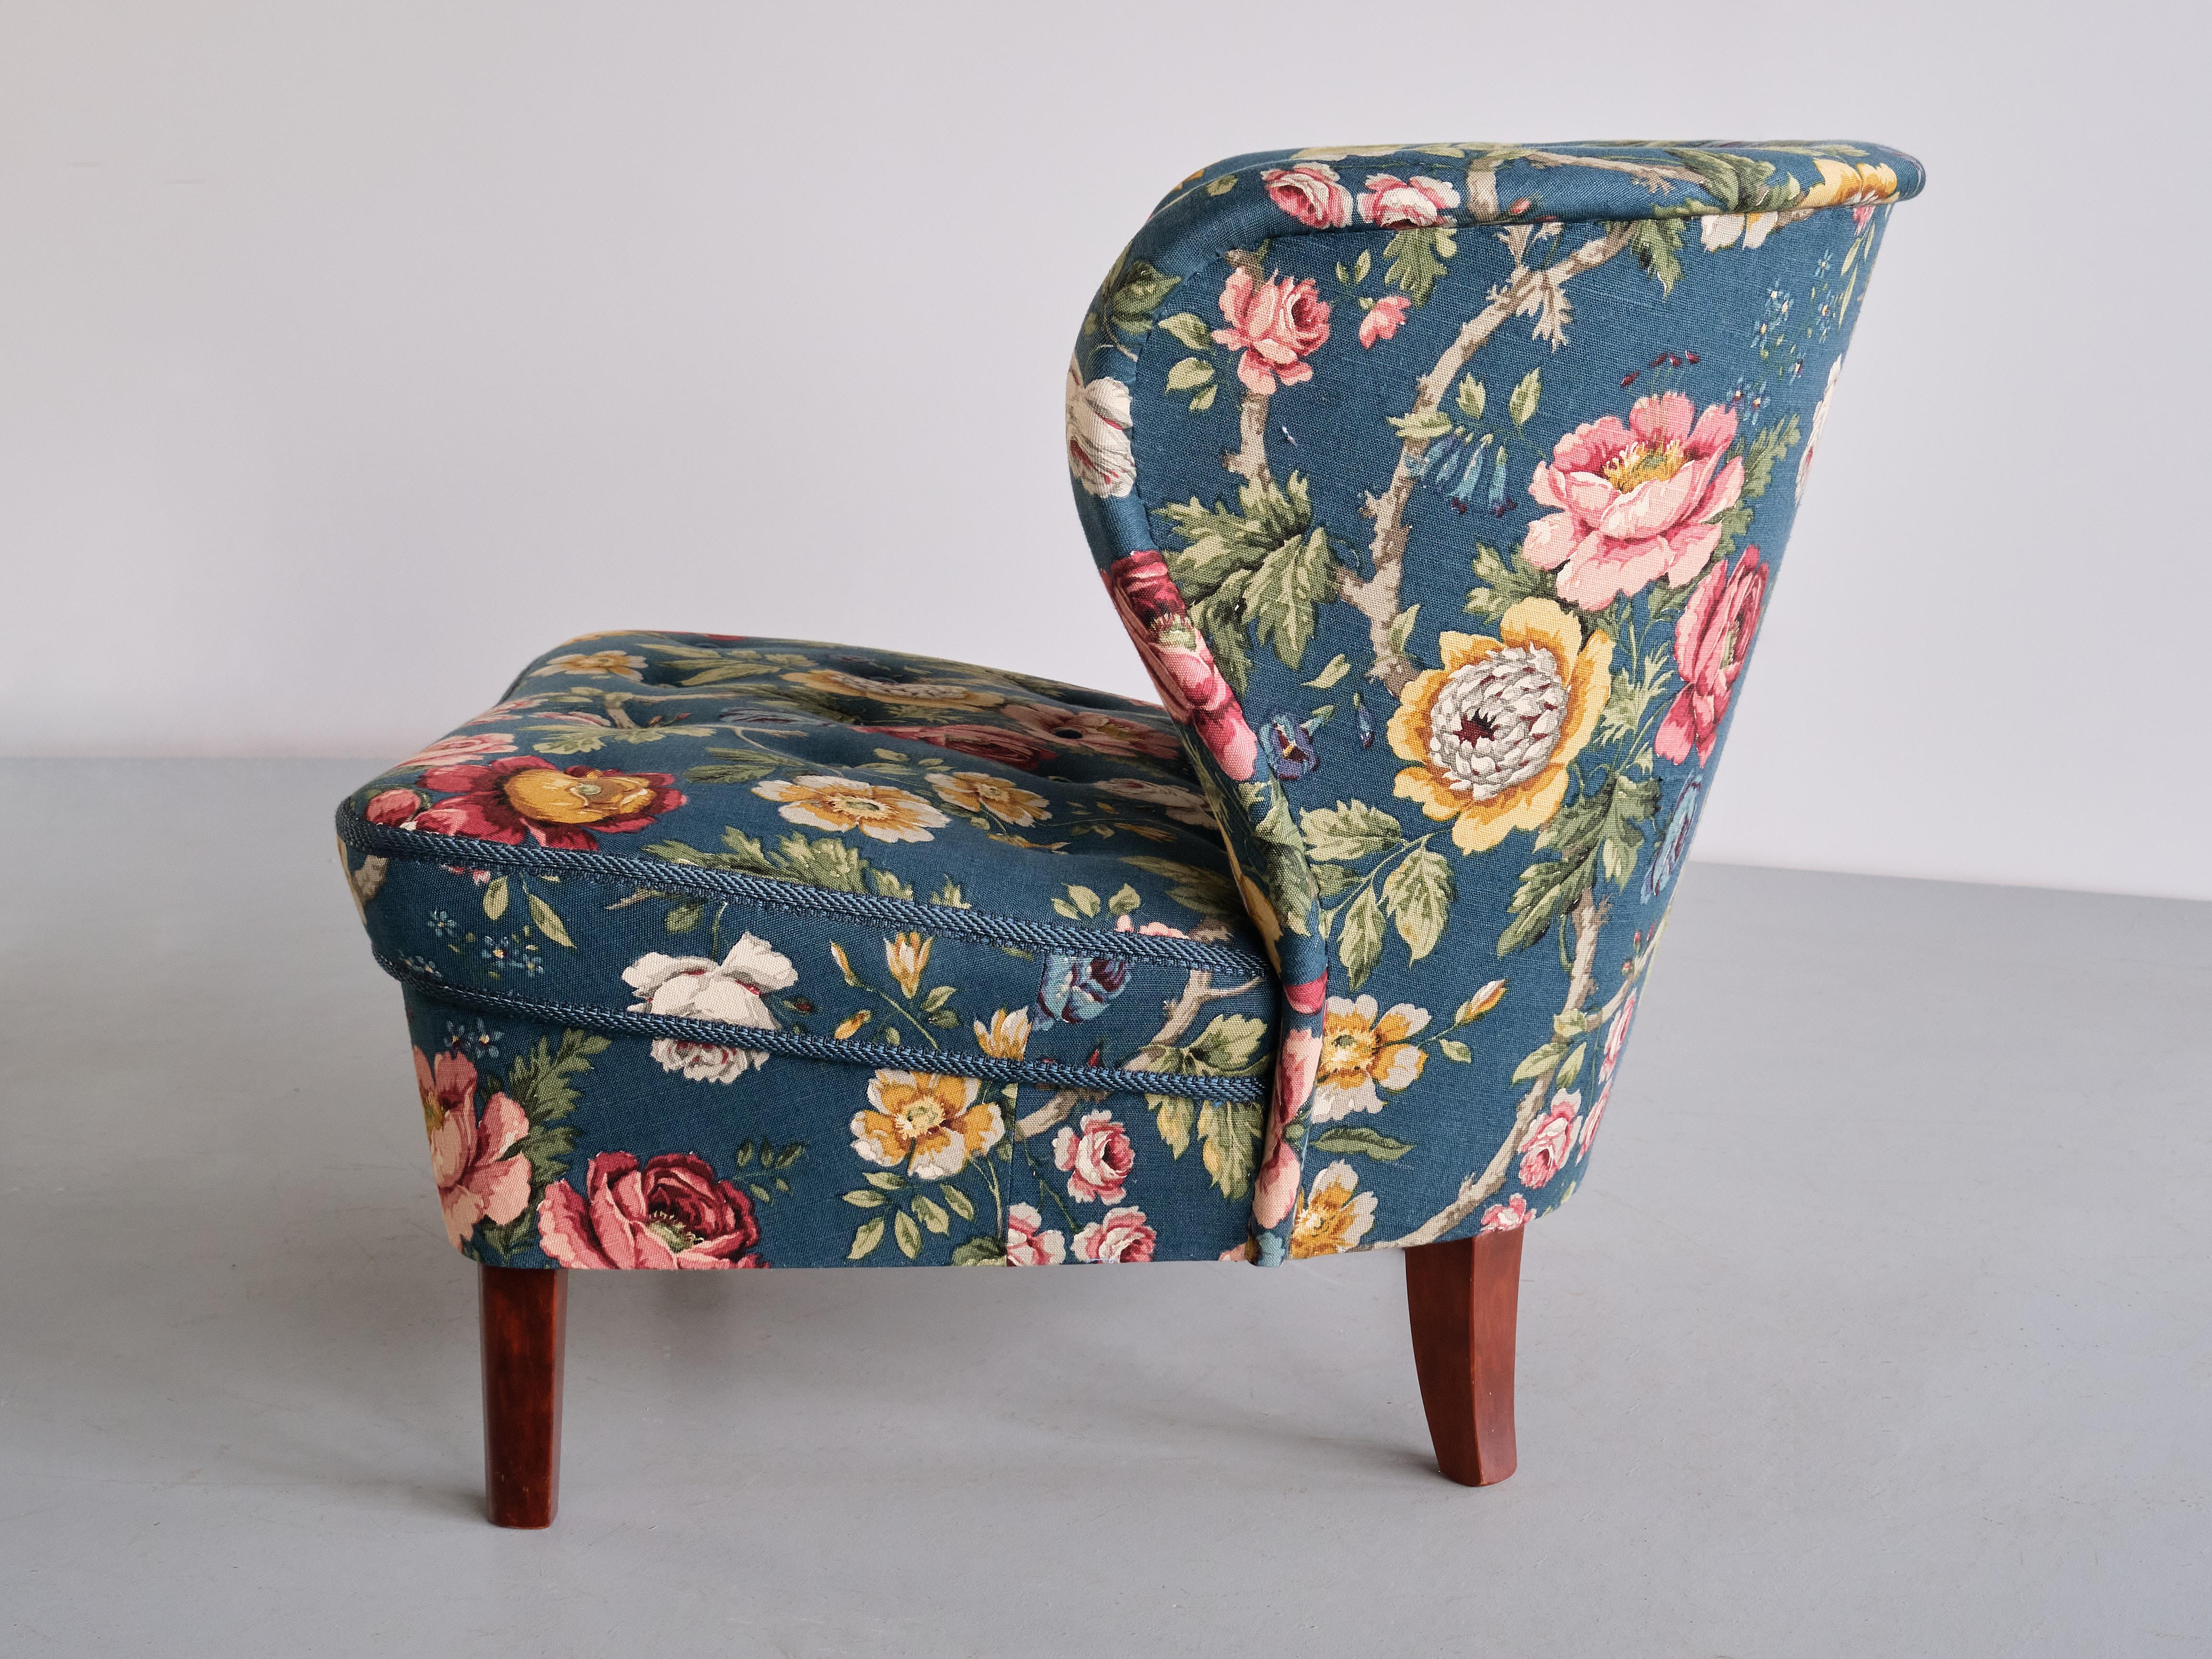 Gösta Jonsson Lounge Chair in Floral Fabric and Birch, Sweden, 1940s For Sale 5